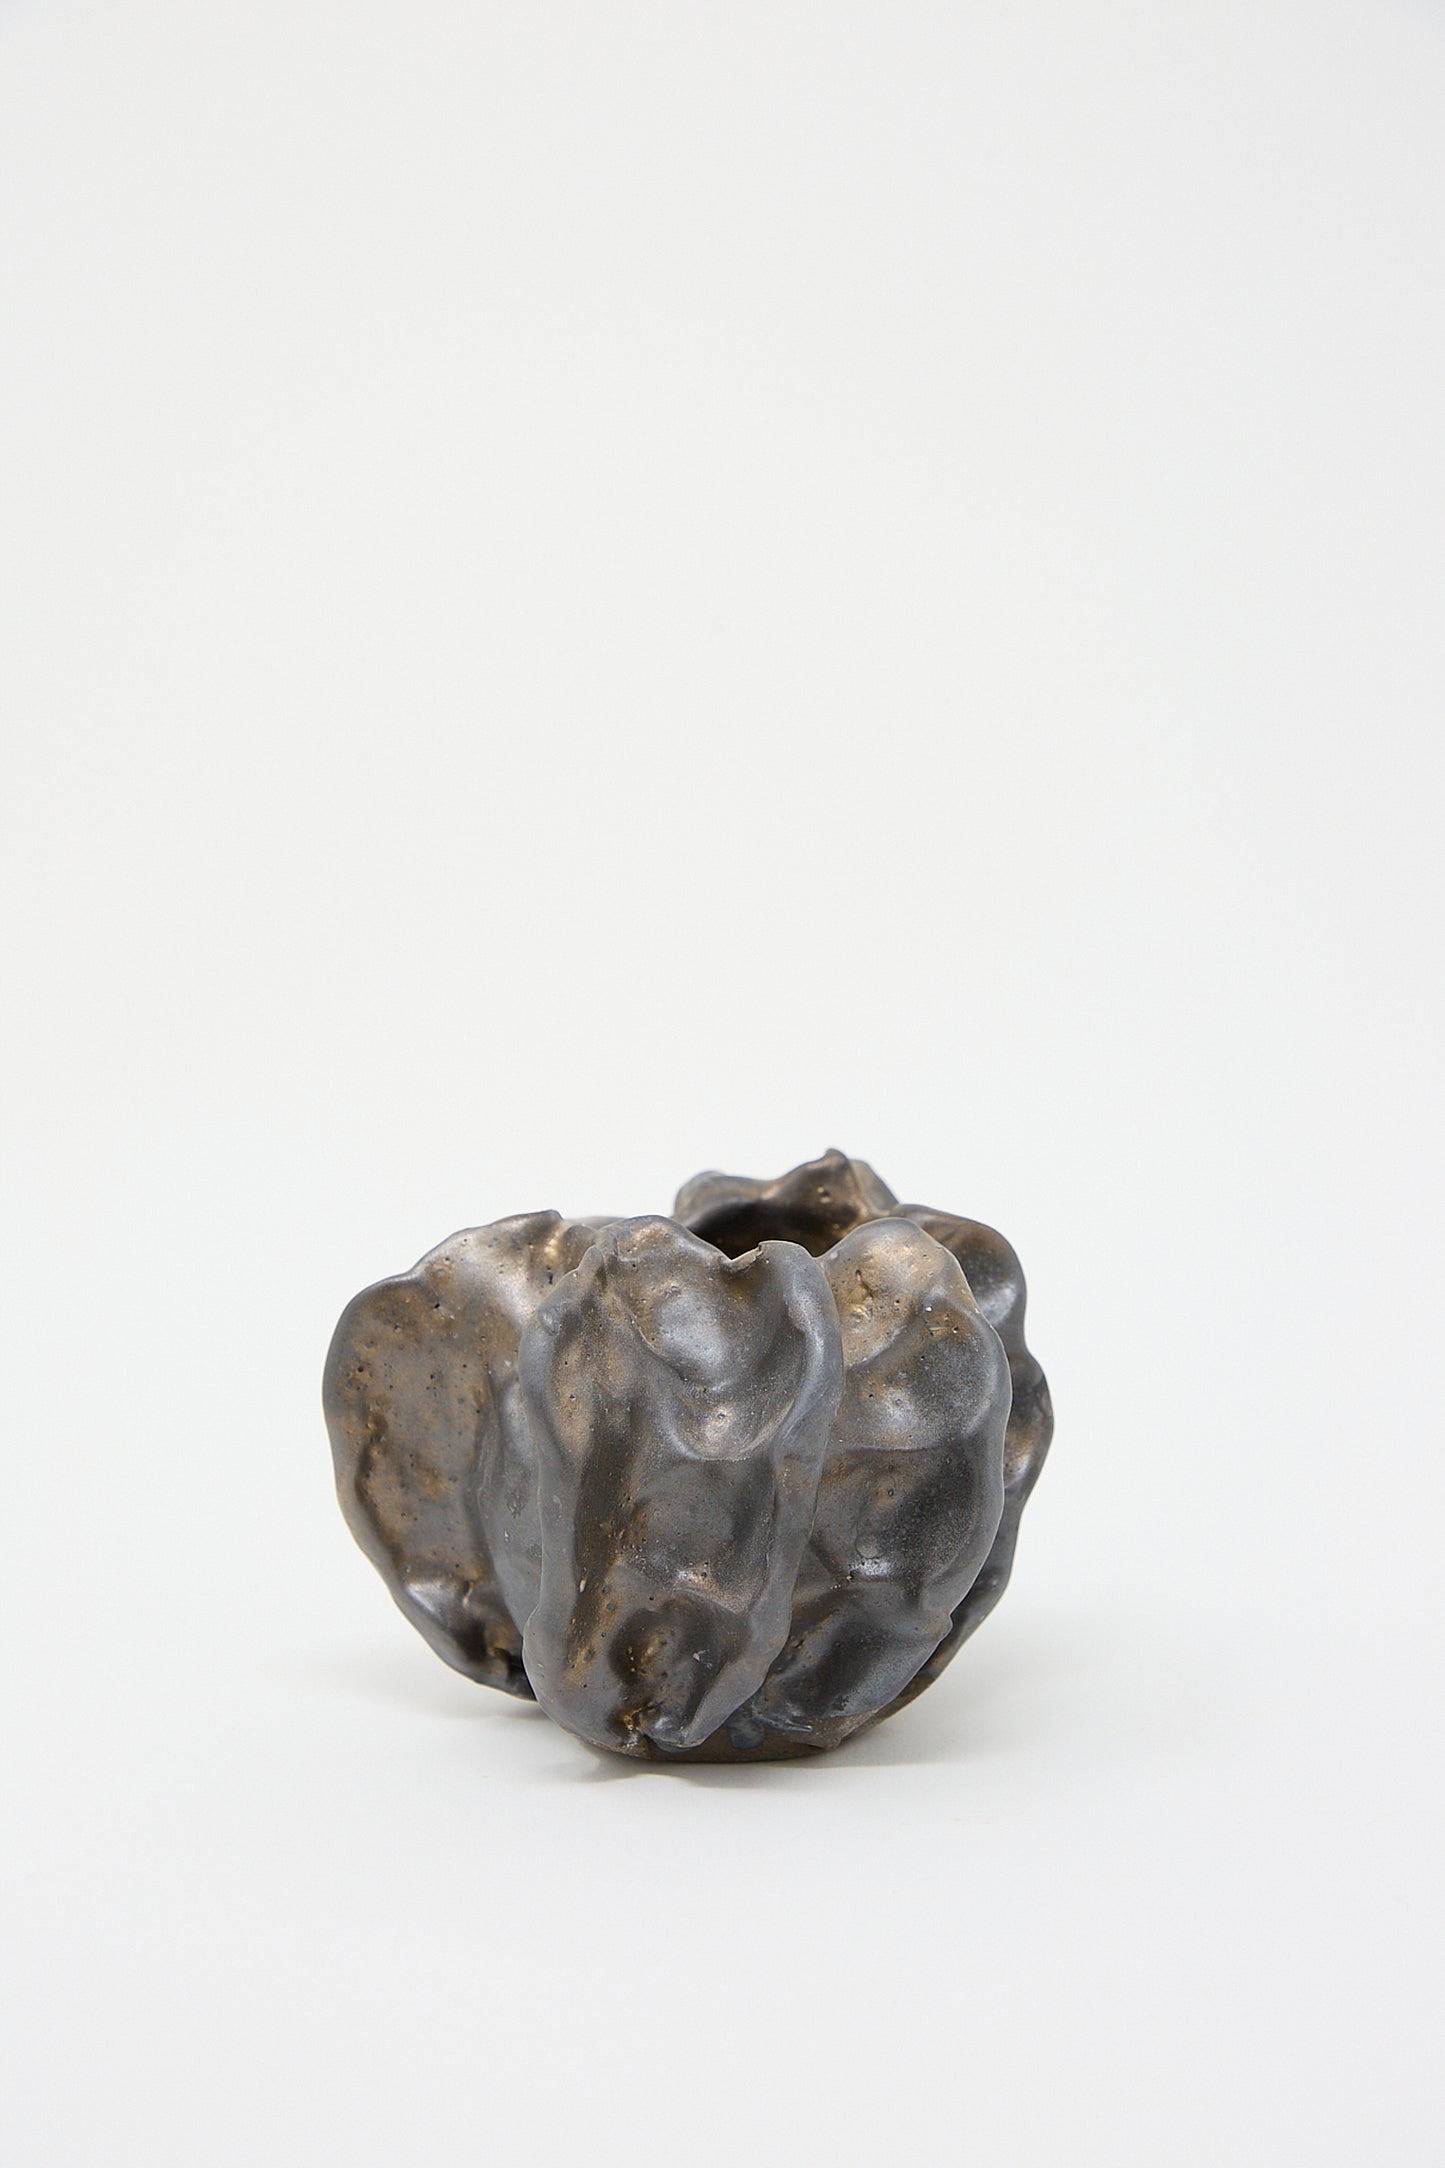 A MONDAYS Urchin Vessel in Glazed Stoneware in black and brown on a white surface.